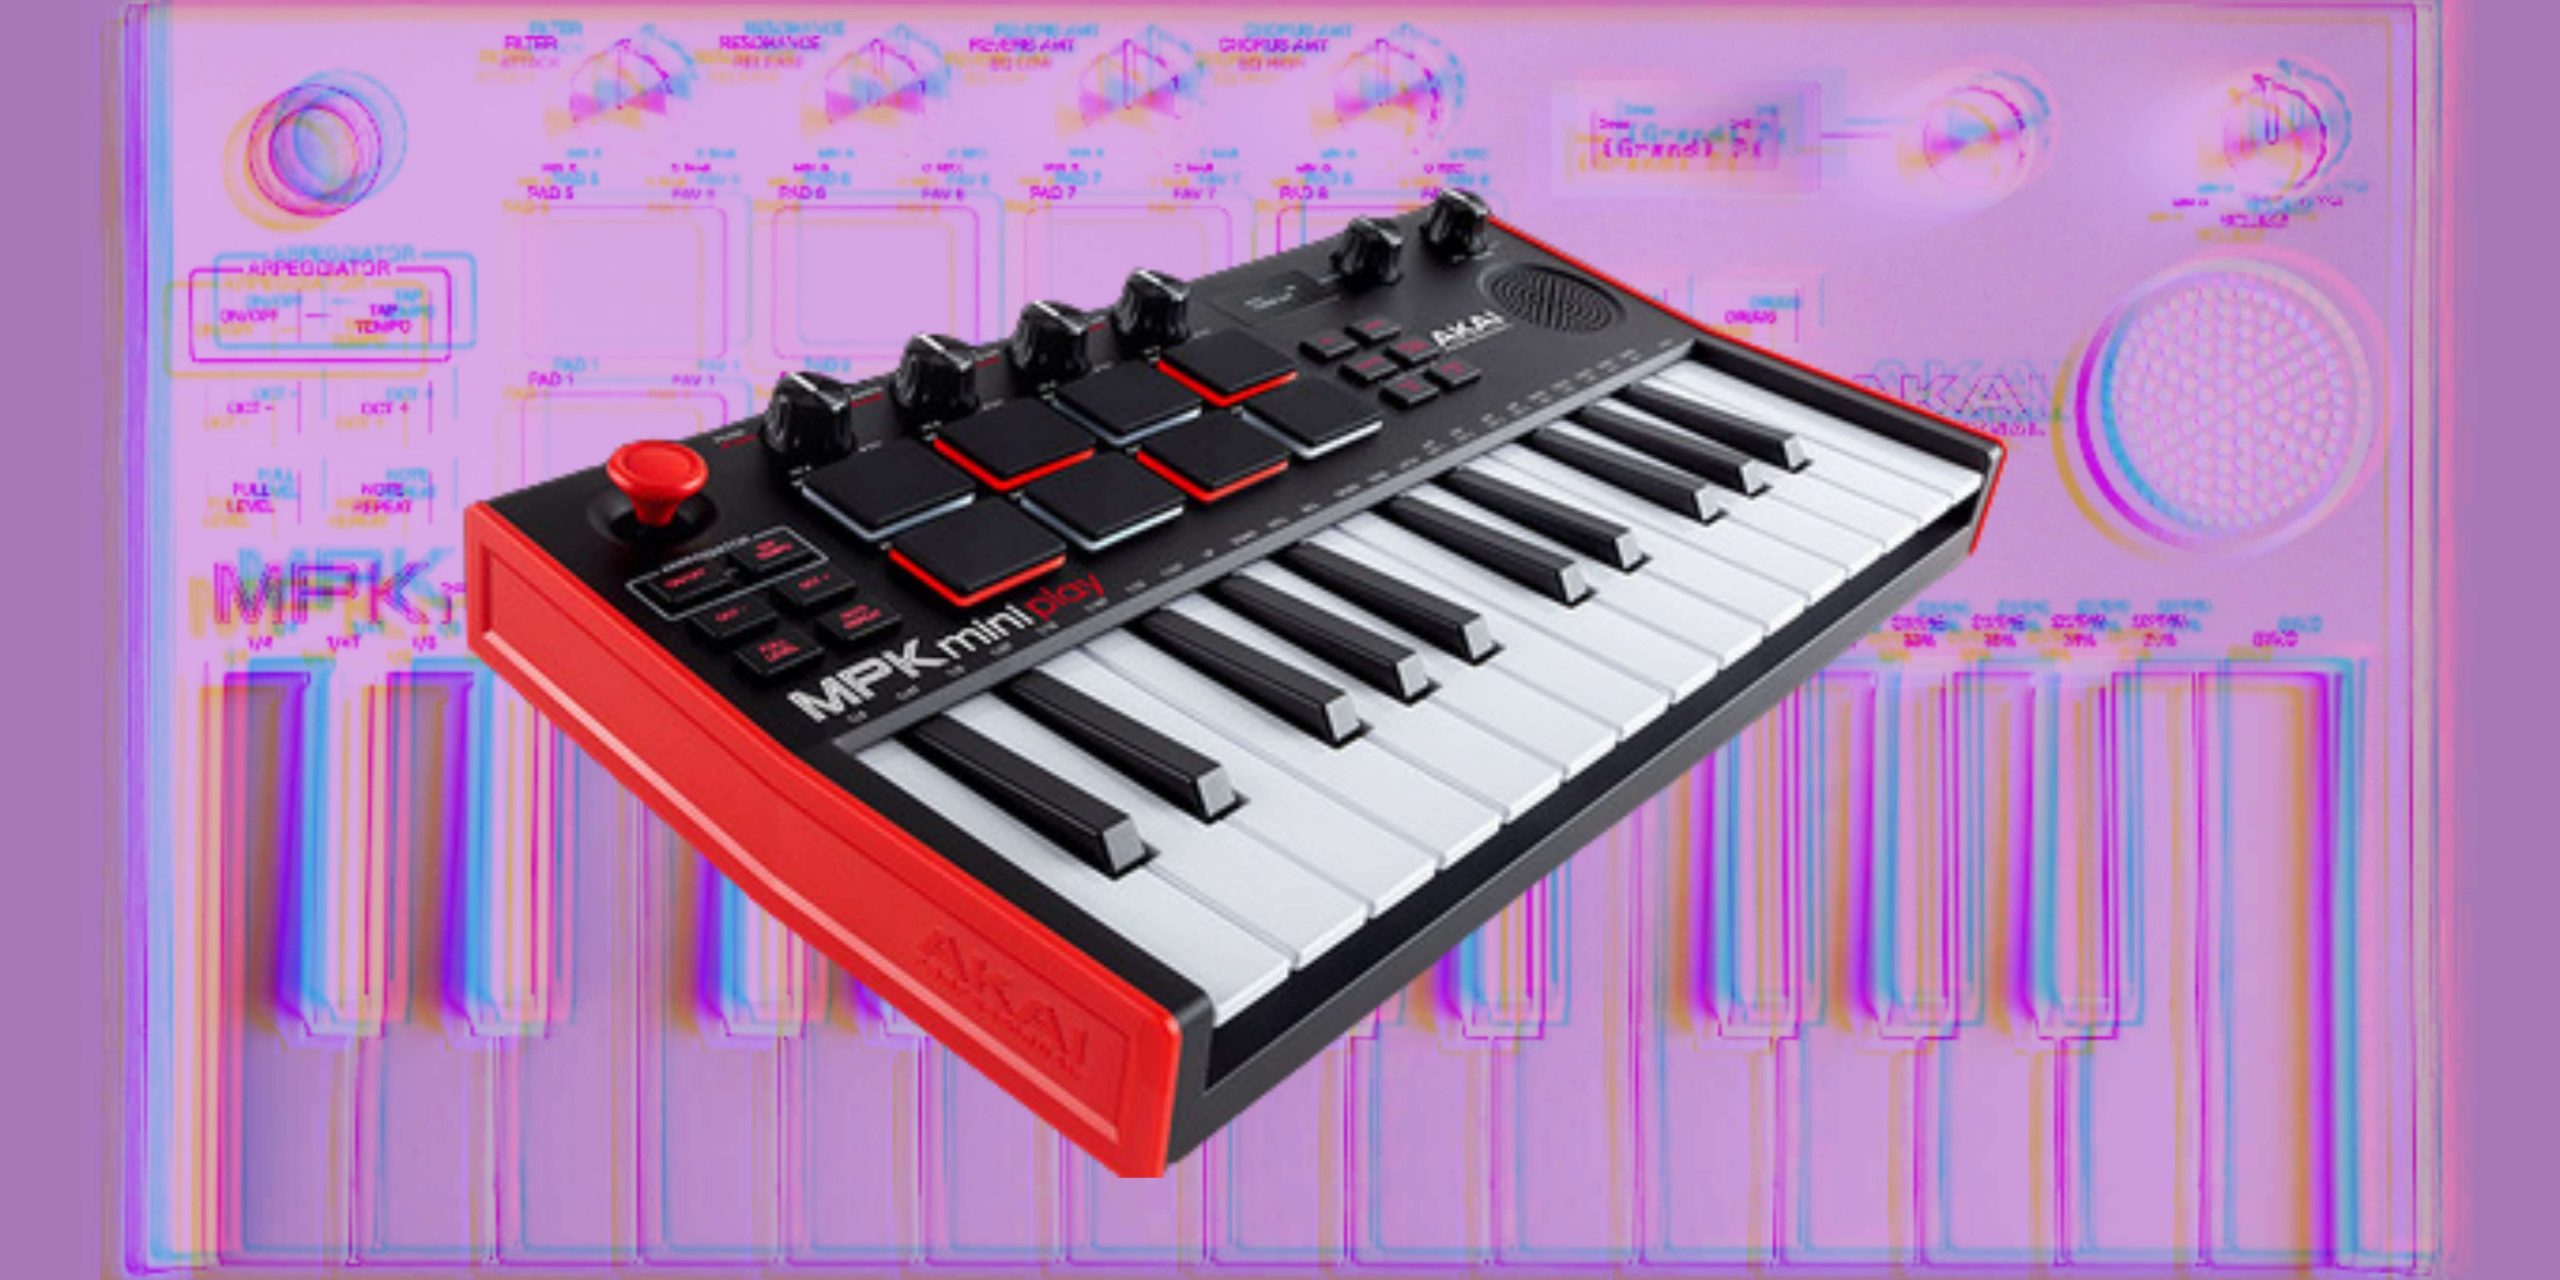 AKAI MPK Mini Play mk3 is A Keyboard Controller With Sounds and a Speaker -  RouteNote Create Blog